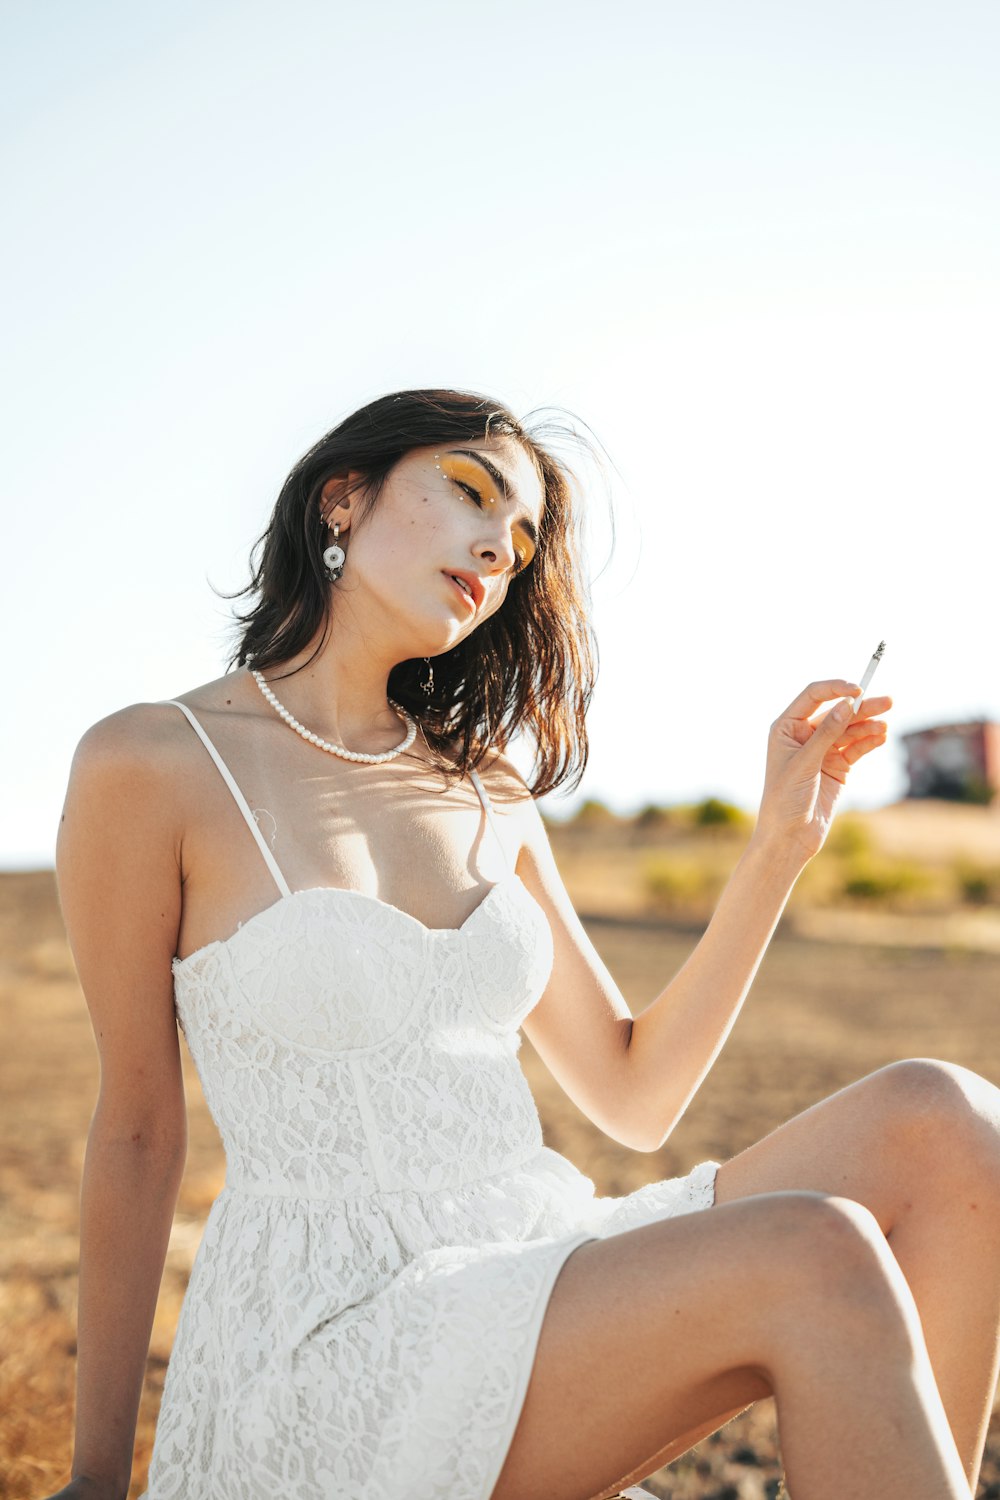 a woman in a white dress holding a cigarette